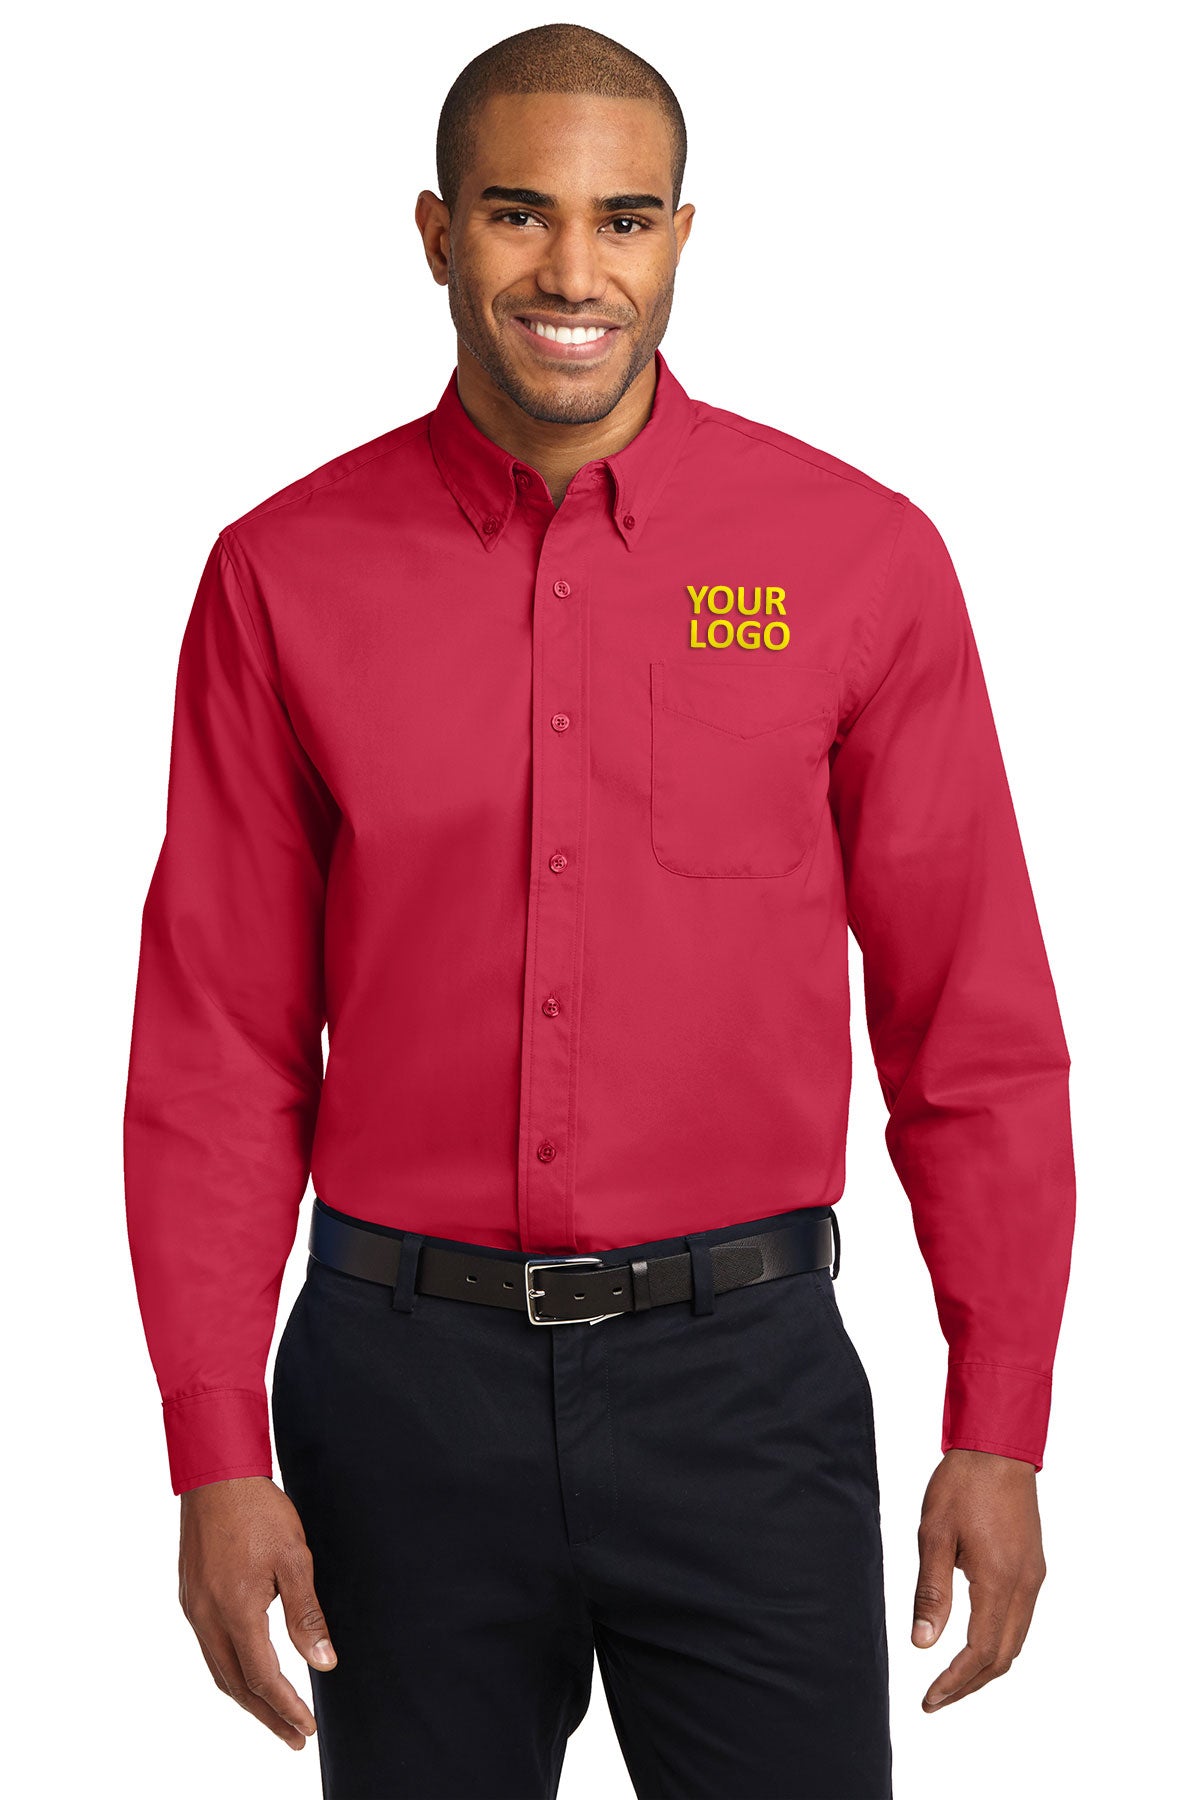 Port Authority Red/Light Stone S608ES business shirts with company logo